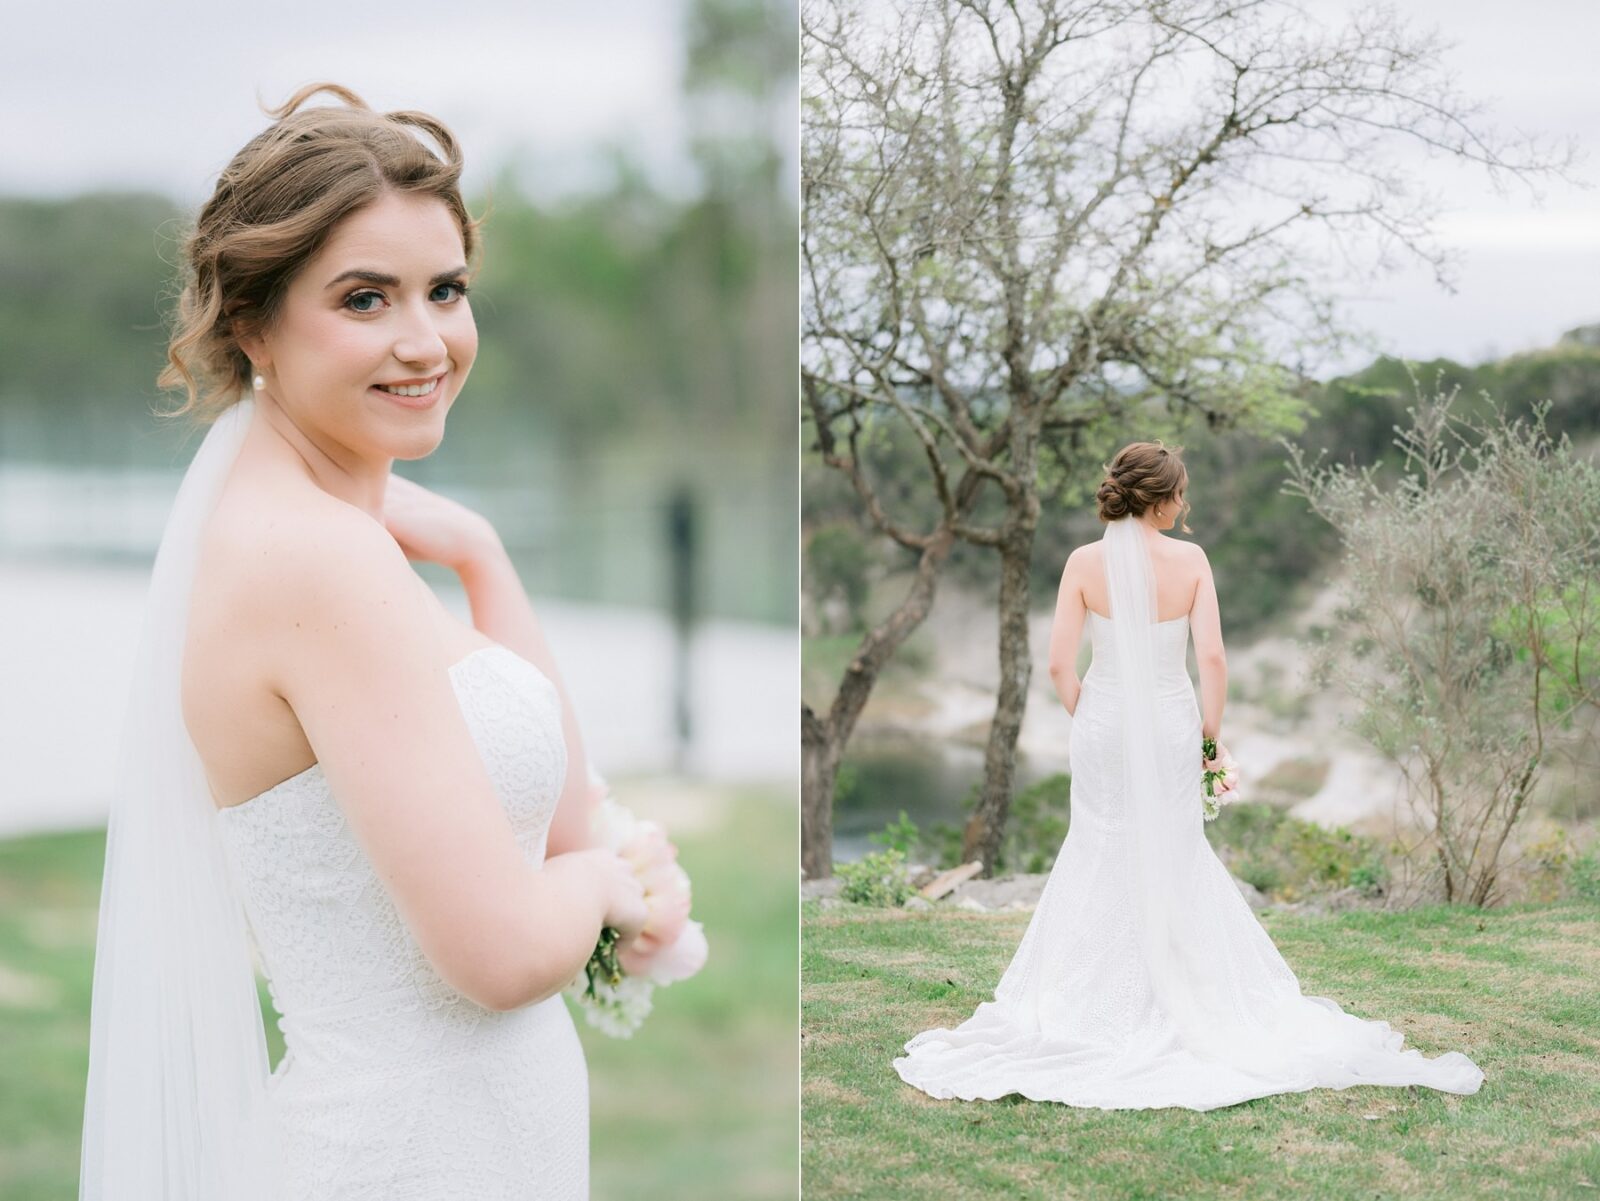 bridal session on cloudy day, winter bridal session, bridal session, bride photography, the videre estate, hill country wedding venue, wimberley wedding venue, austin wedding photography, tara paige weddings, 